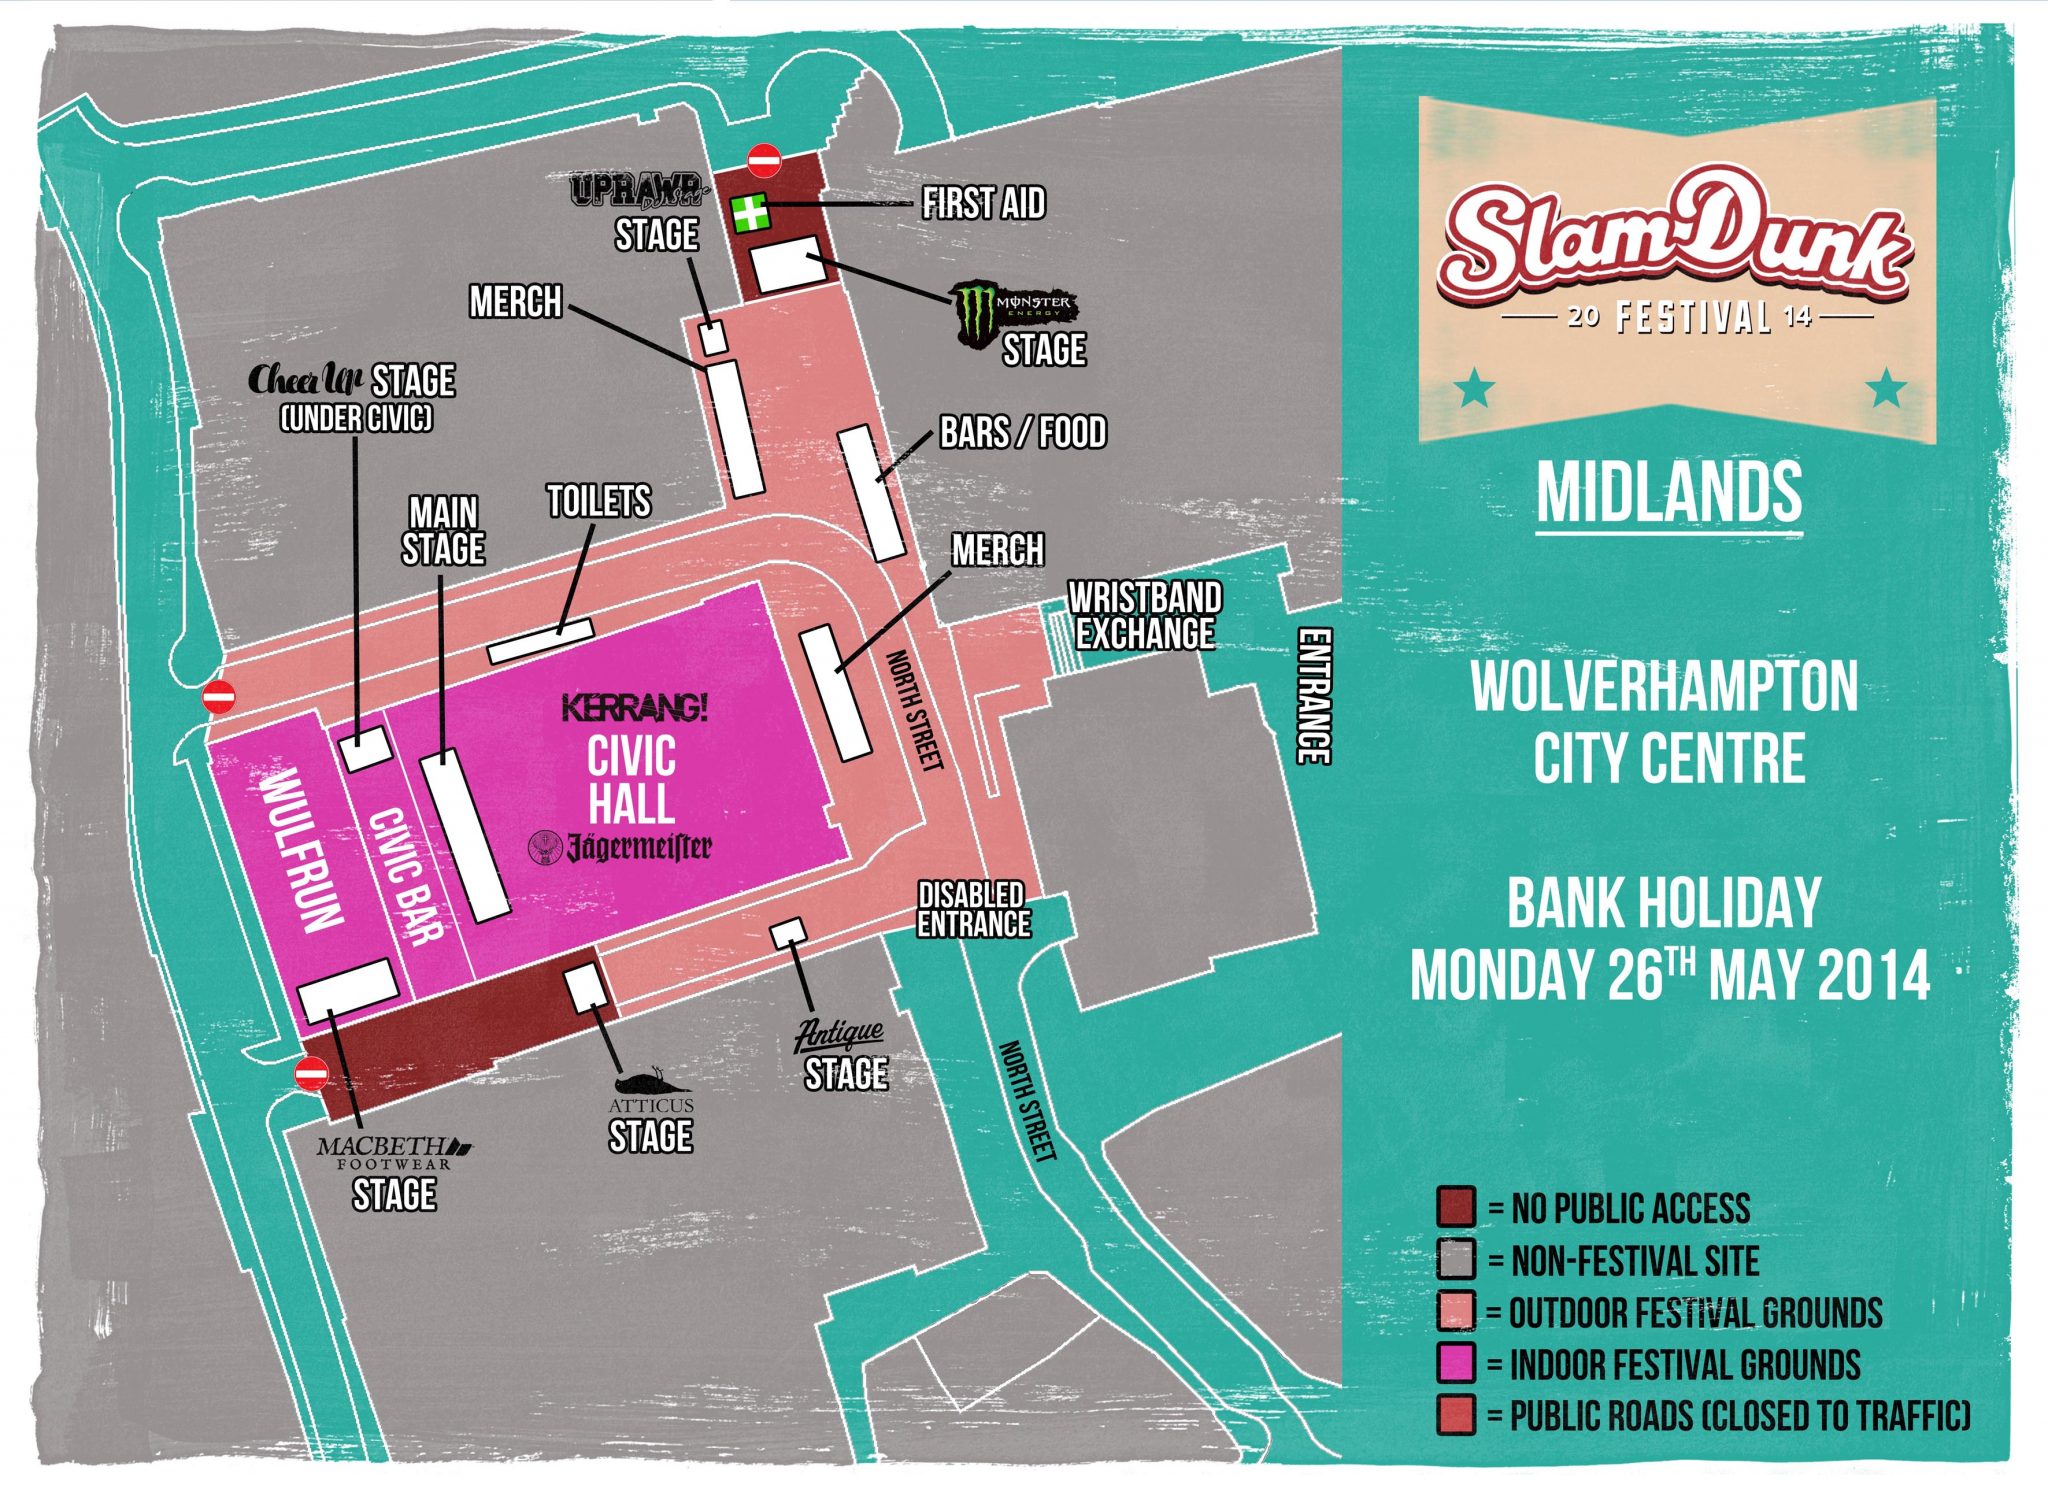 Slam Dunk Festival Stage Layouts - The Pop Punk Days2048 x 1496